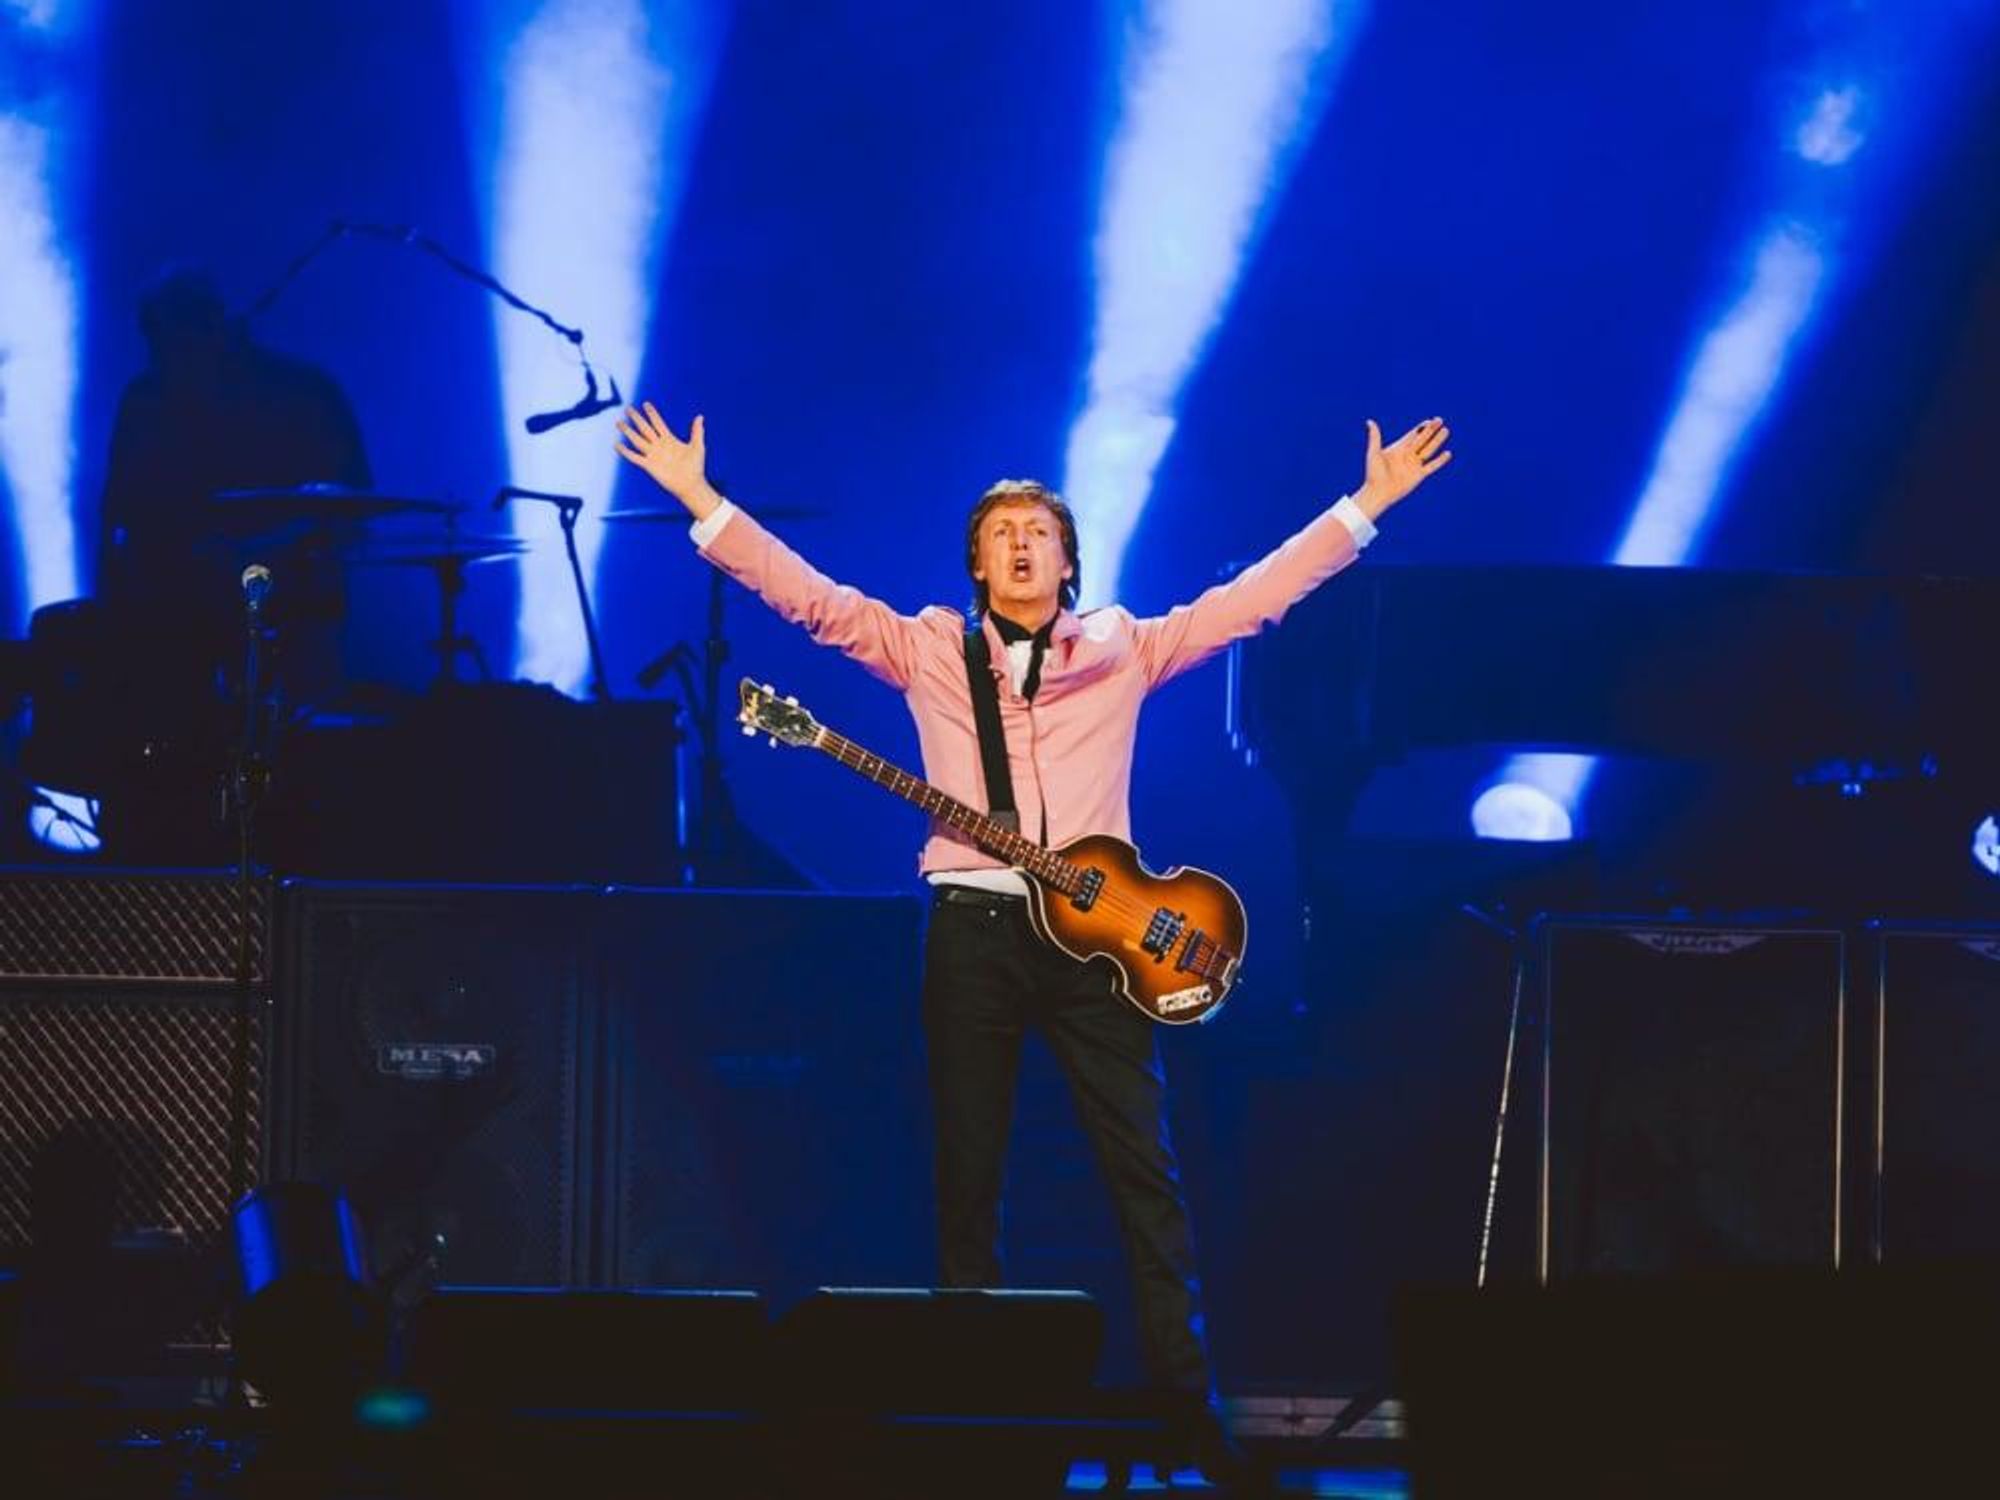 Paul McCartney at the Frank Erwin Center arms open